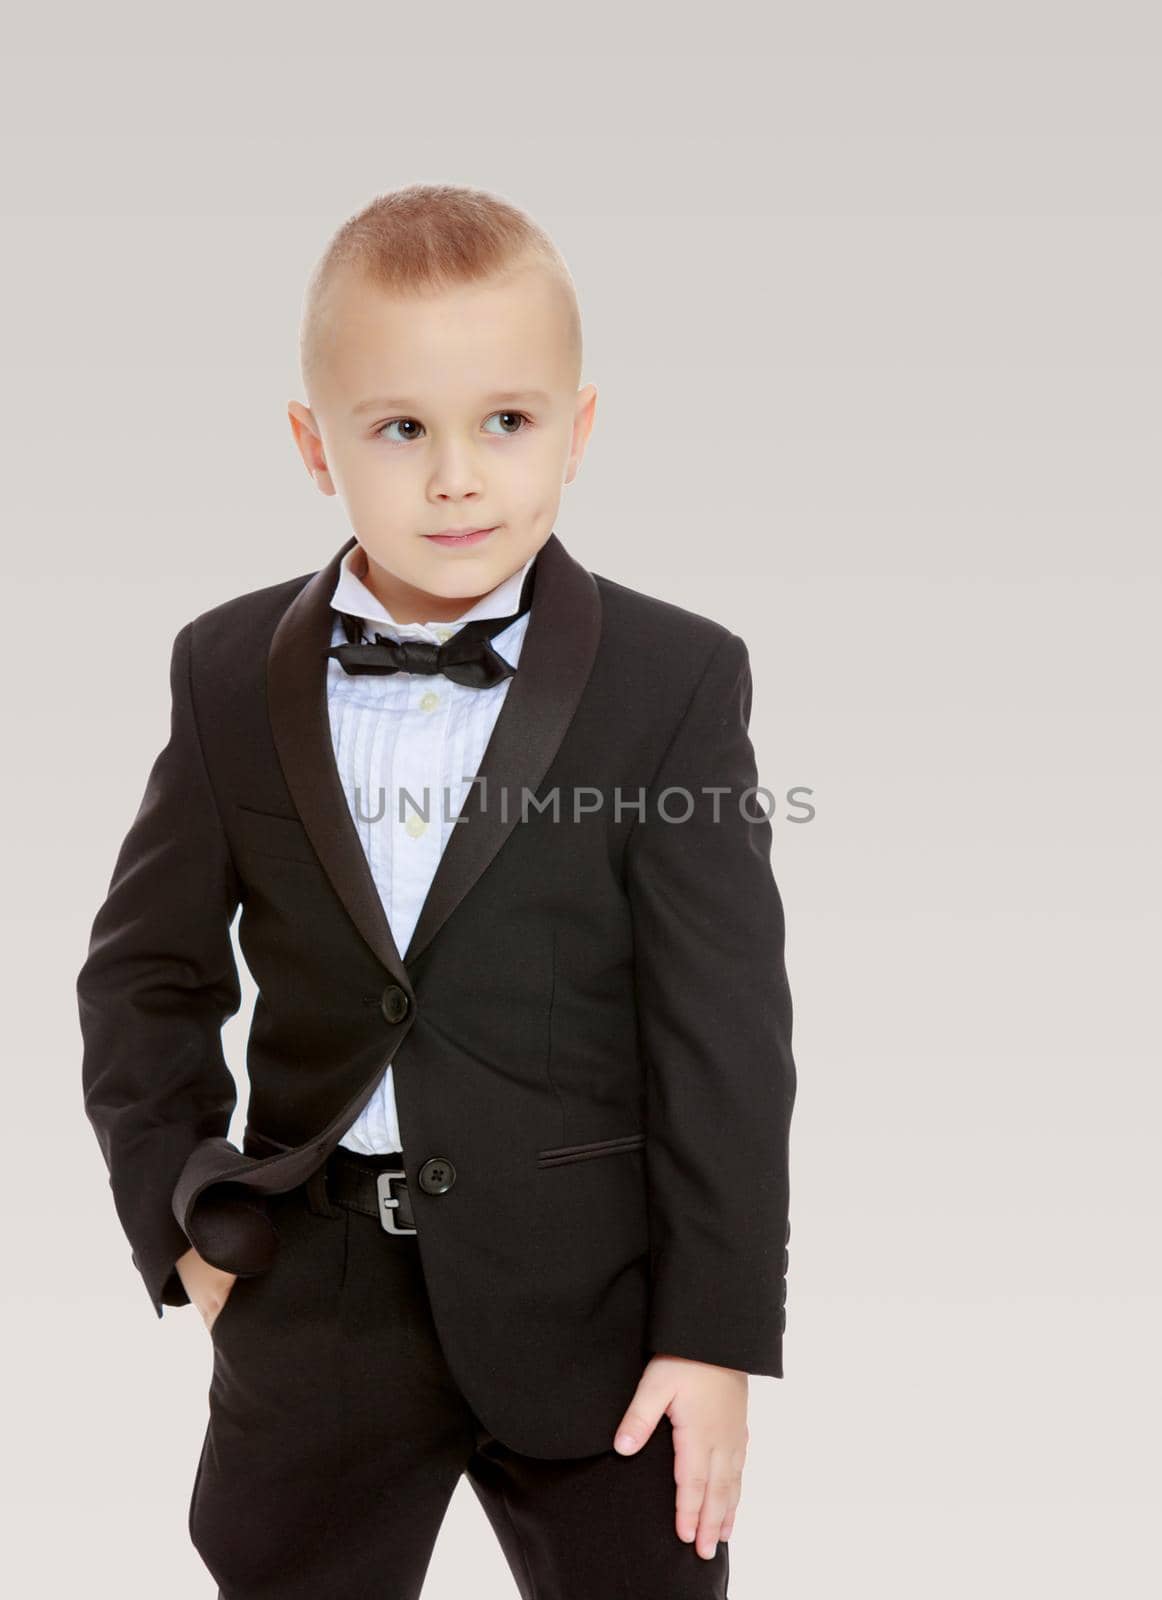 Beautiful little blond boy in a fashionable black suit with a tie.On a gray background.